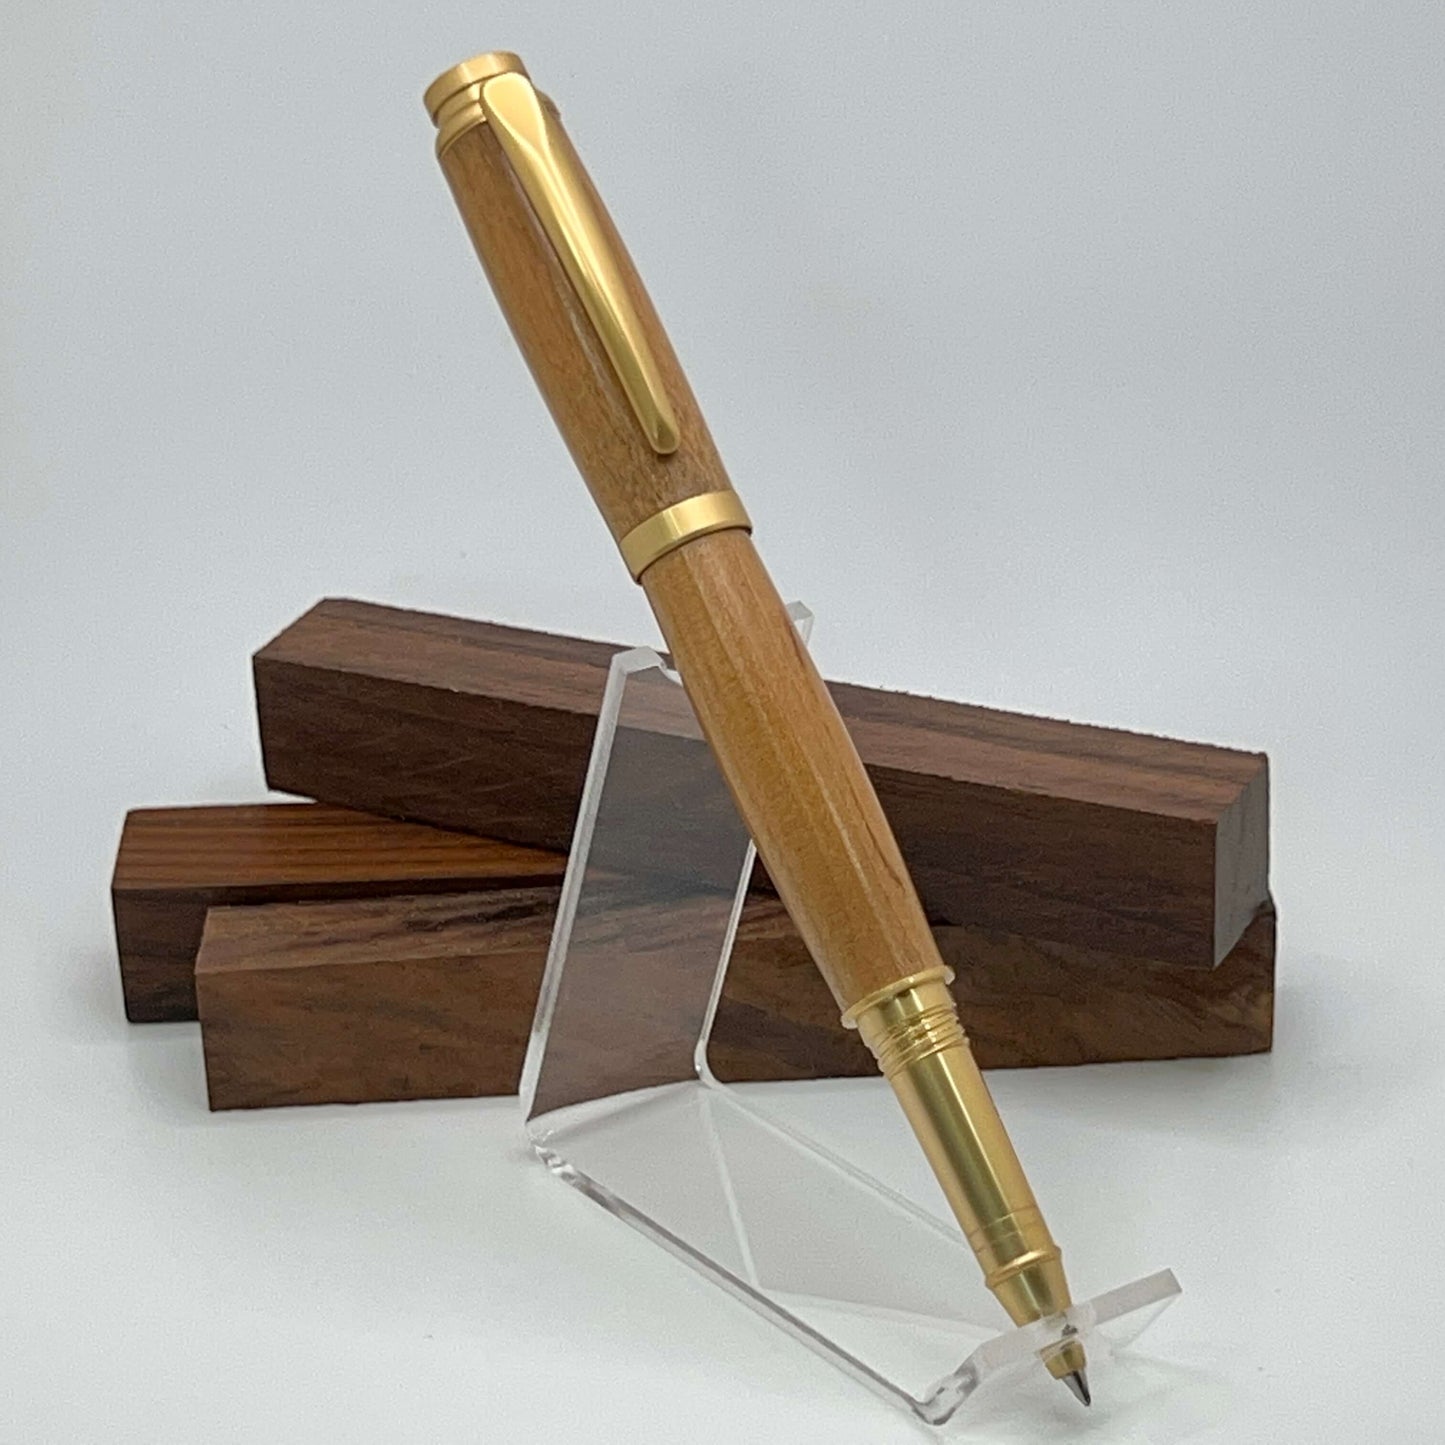 Handcrafted pen with cherry wood and satin gold hardware